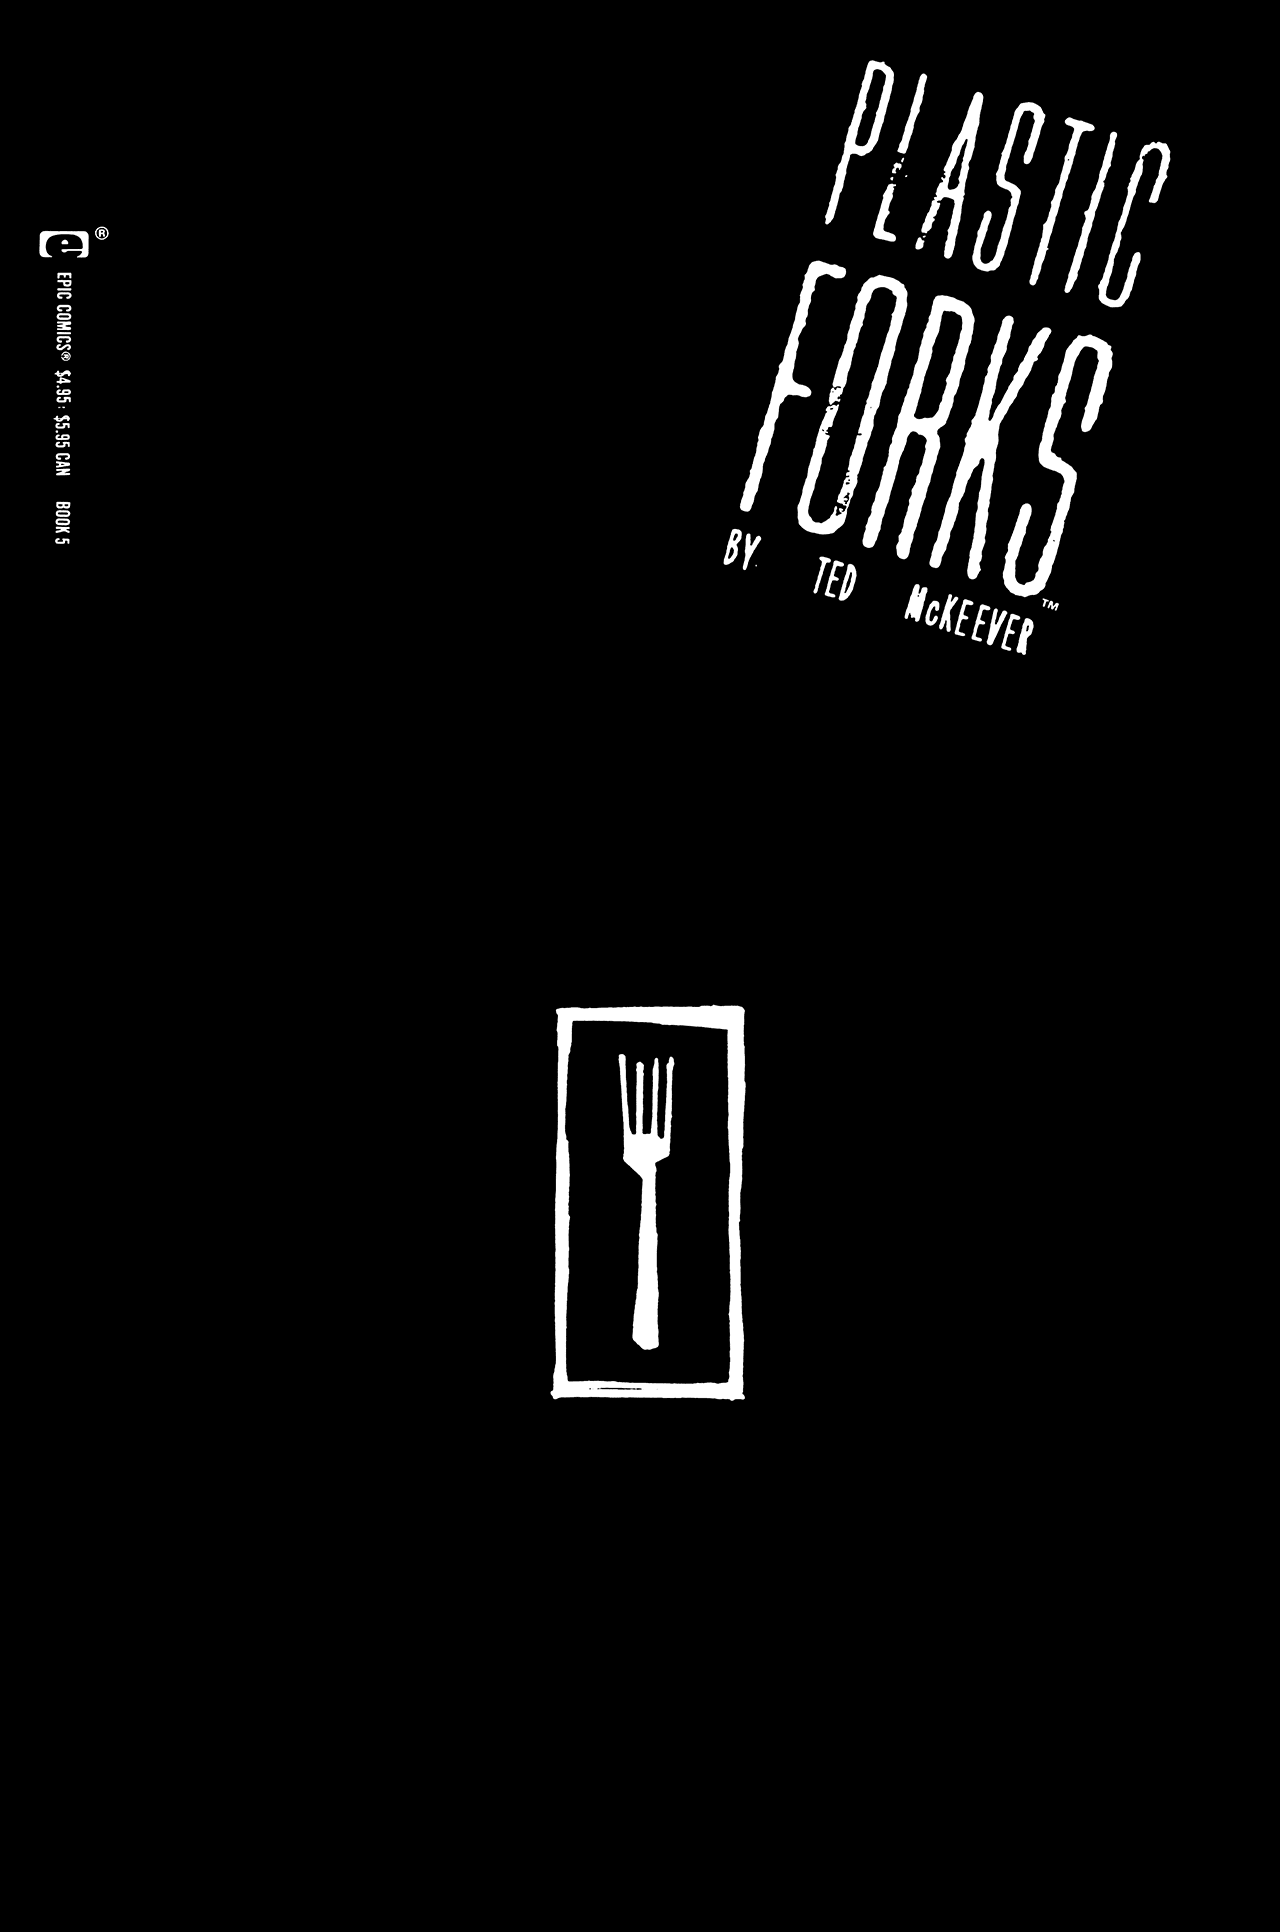 Read online Plastic Forks comic -  Issue #5 - 1